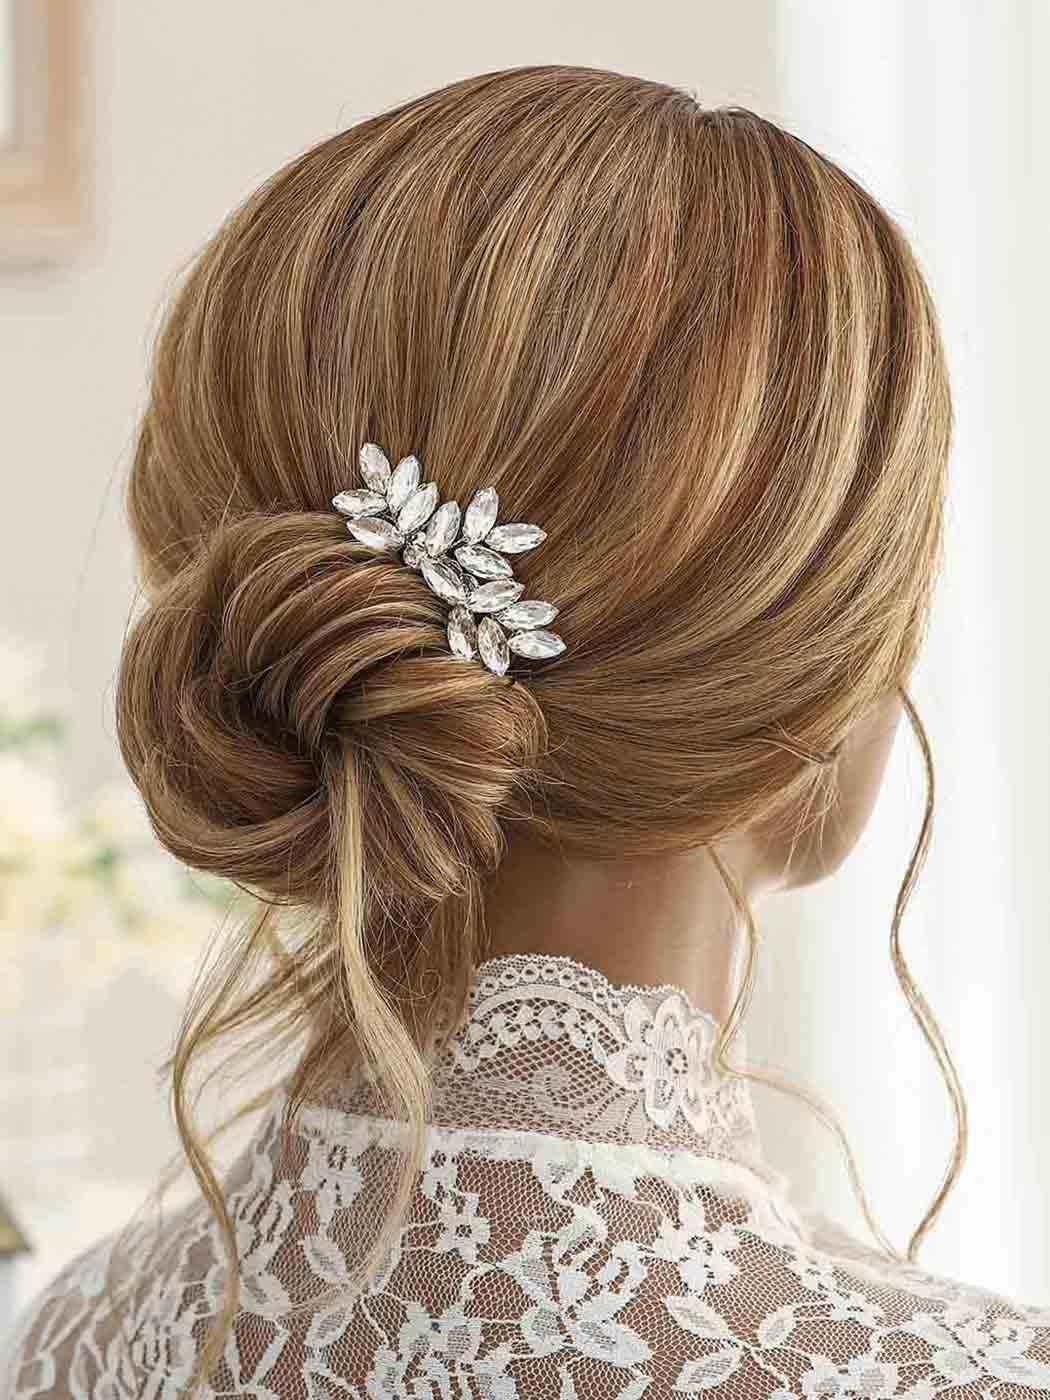 Catery Crystal Bride Wedding Hair Comb Hair Accessories with Rhinestone  Bridal Side Combs for Women and Girls (A Silver)